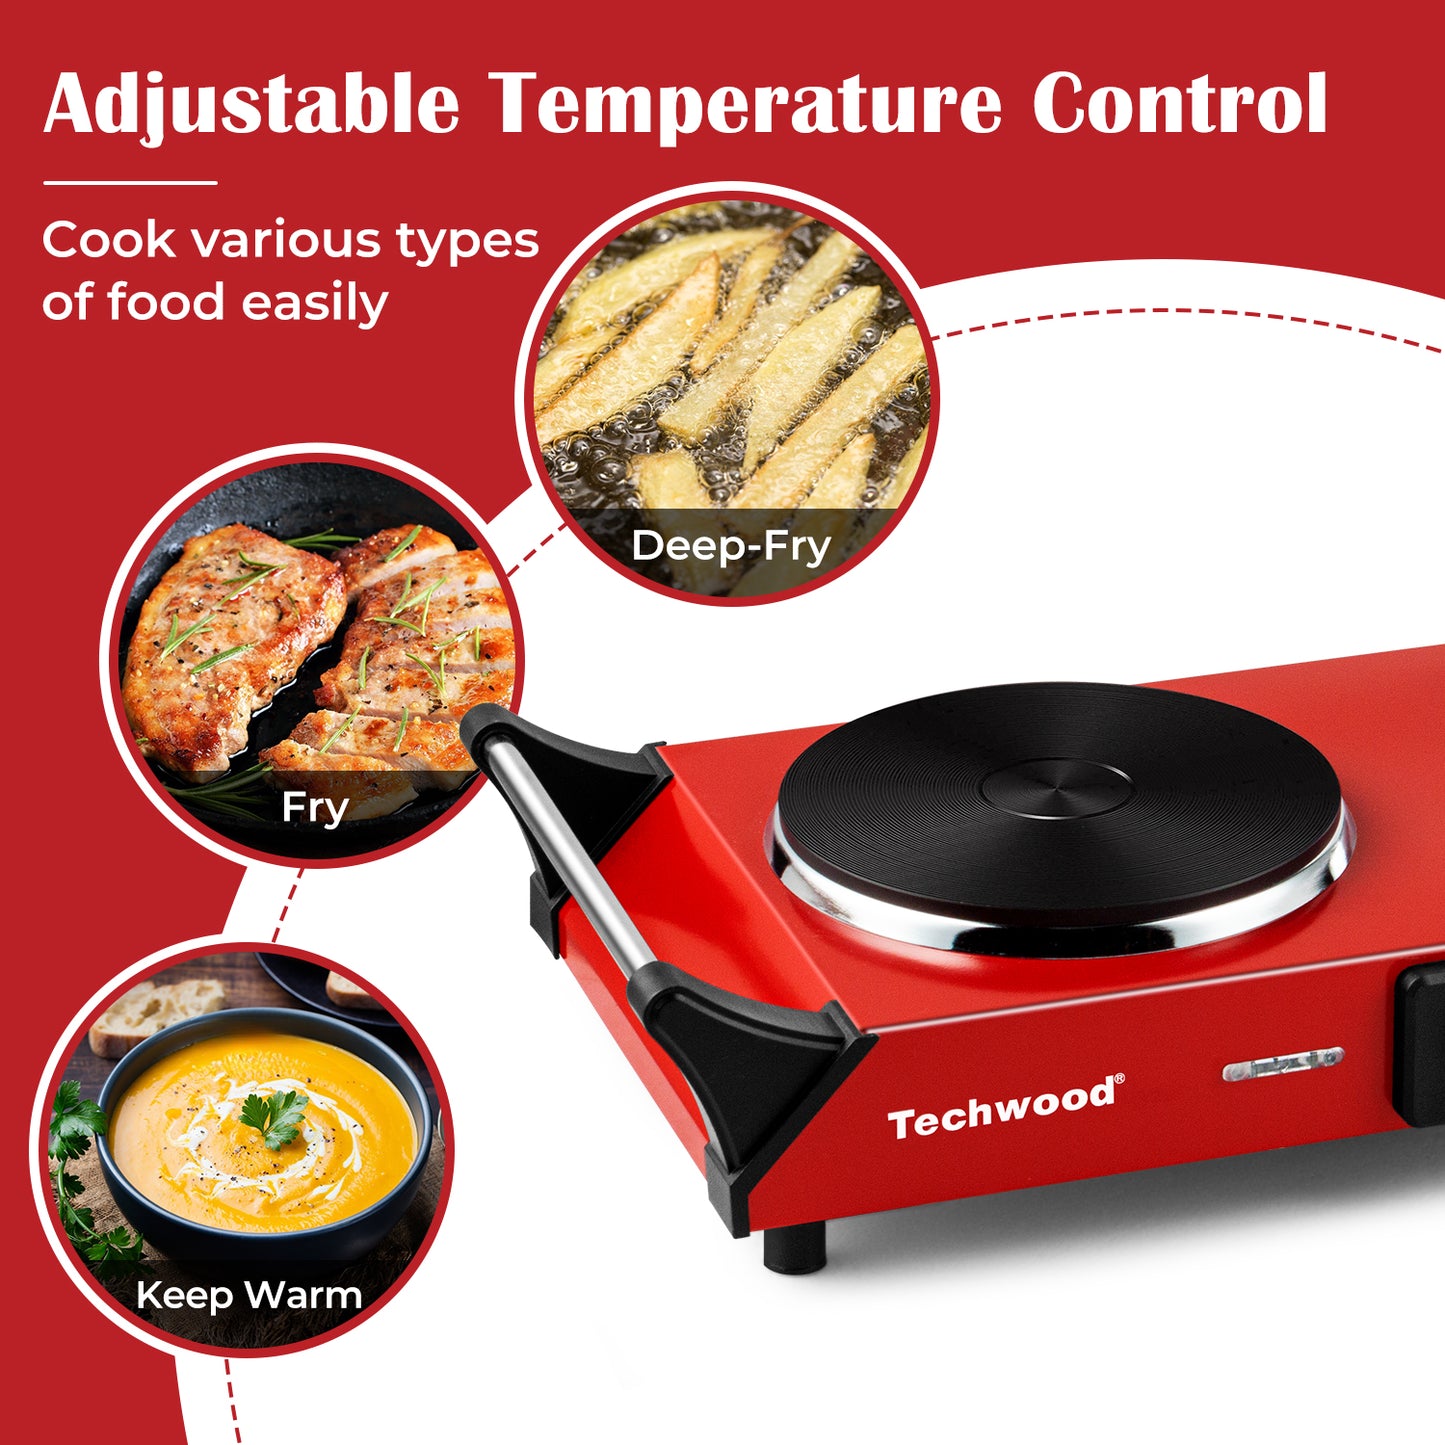 Hot Plate, Techwood Electric Stove Countertop Double Burner for Cooking Infrared Ceramic 1800W Dual Cooktop with Adjustable Temperature Control